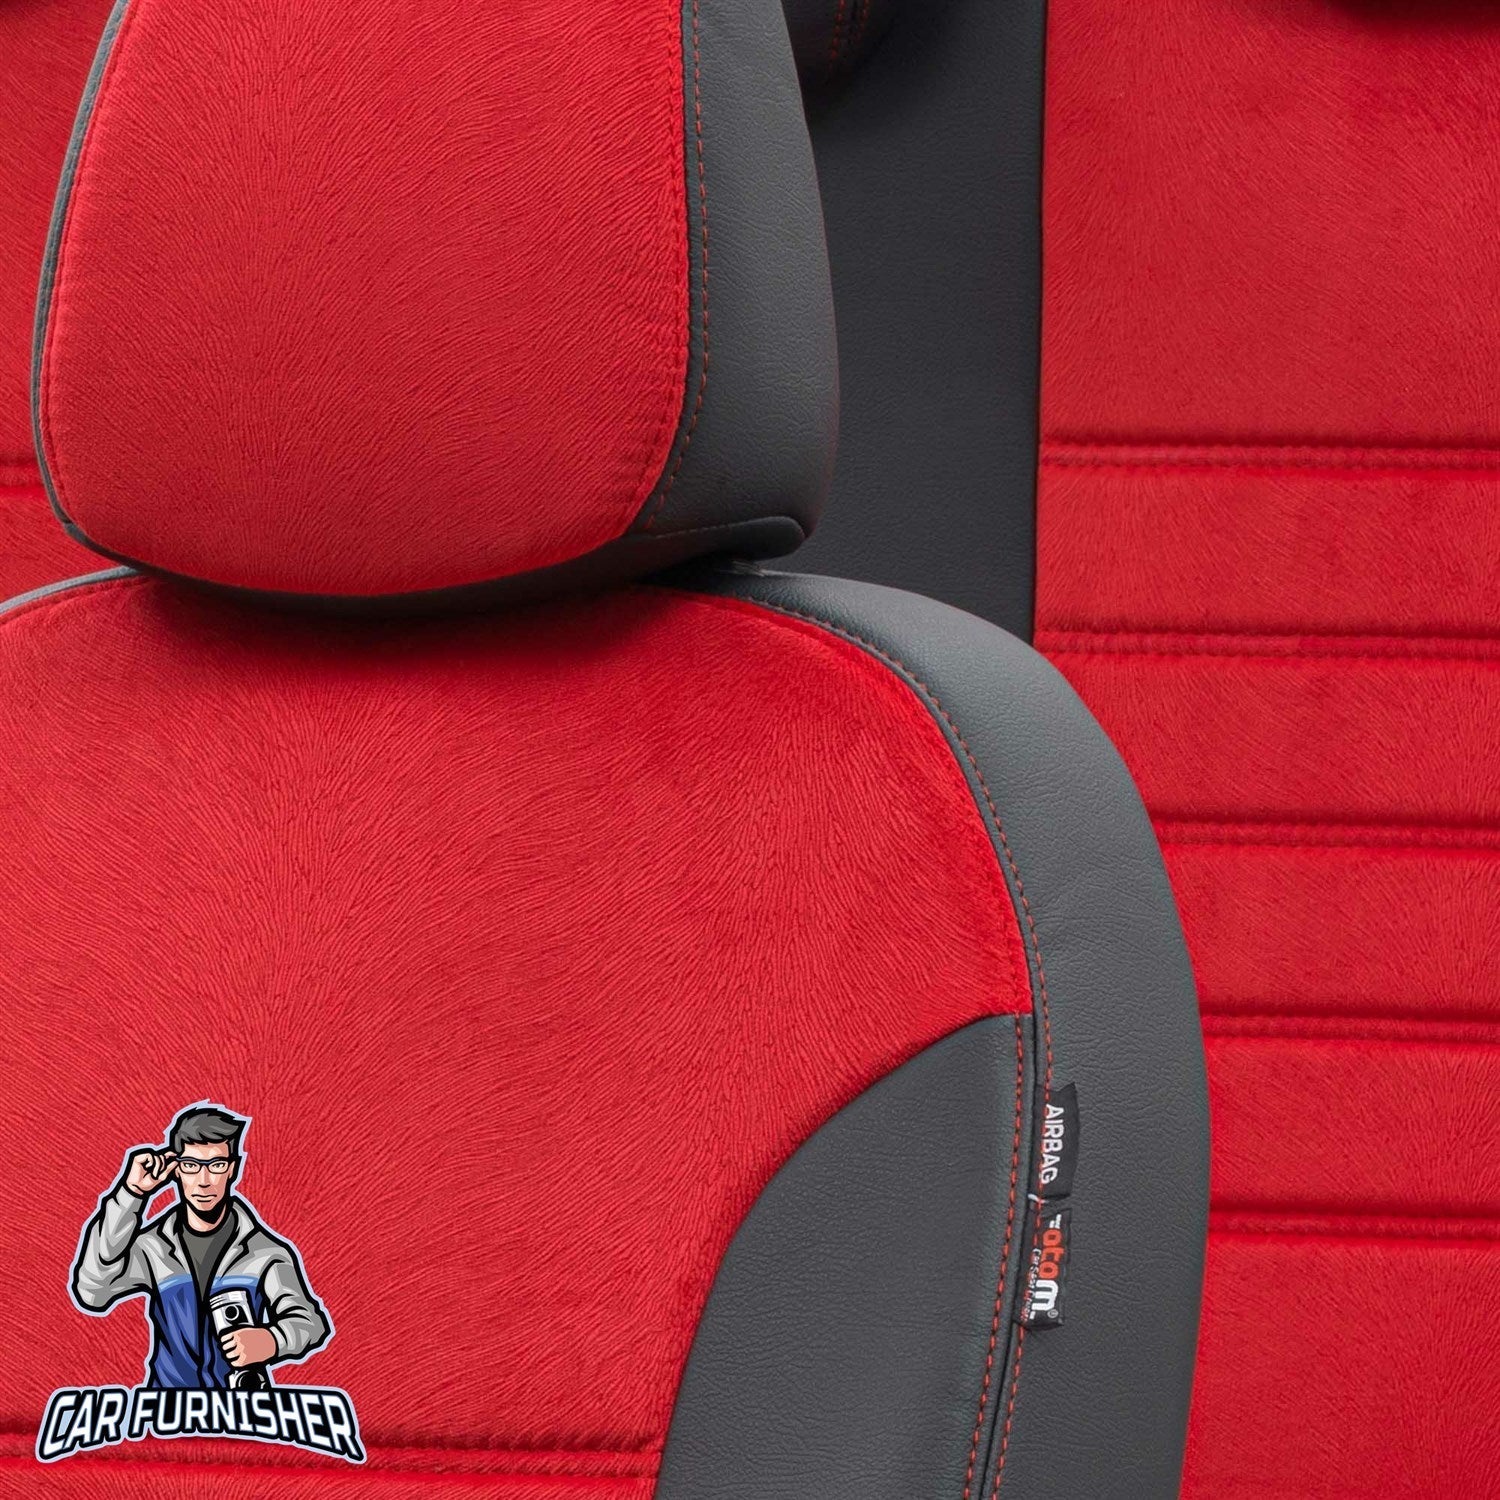 Honda Accord Seat Cover London Foal Feather Design Red Leather & Foal Feather